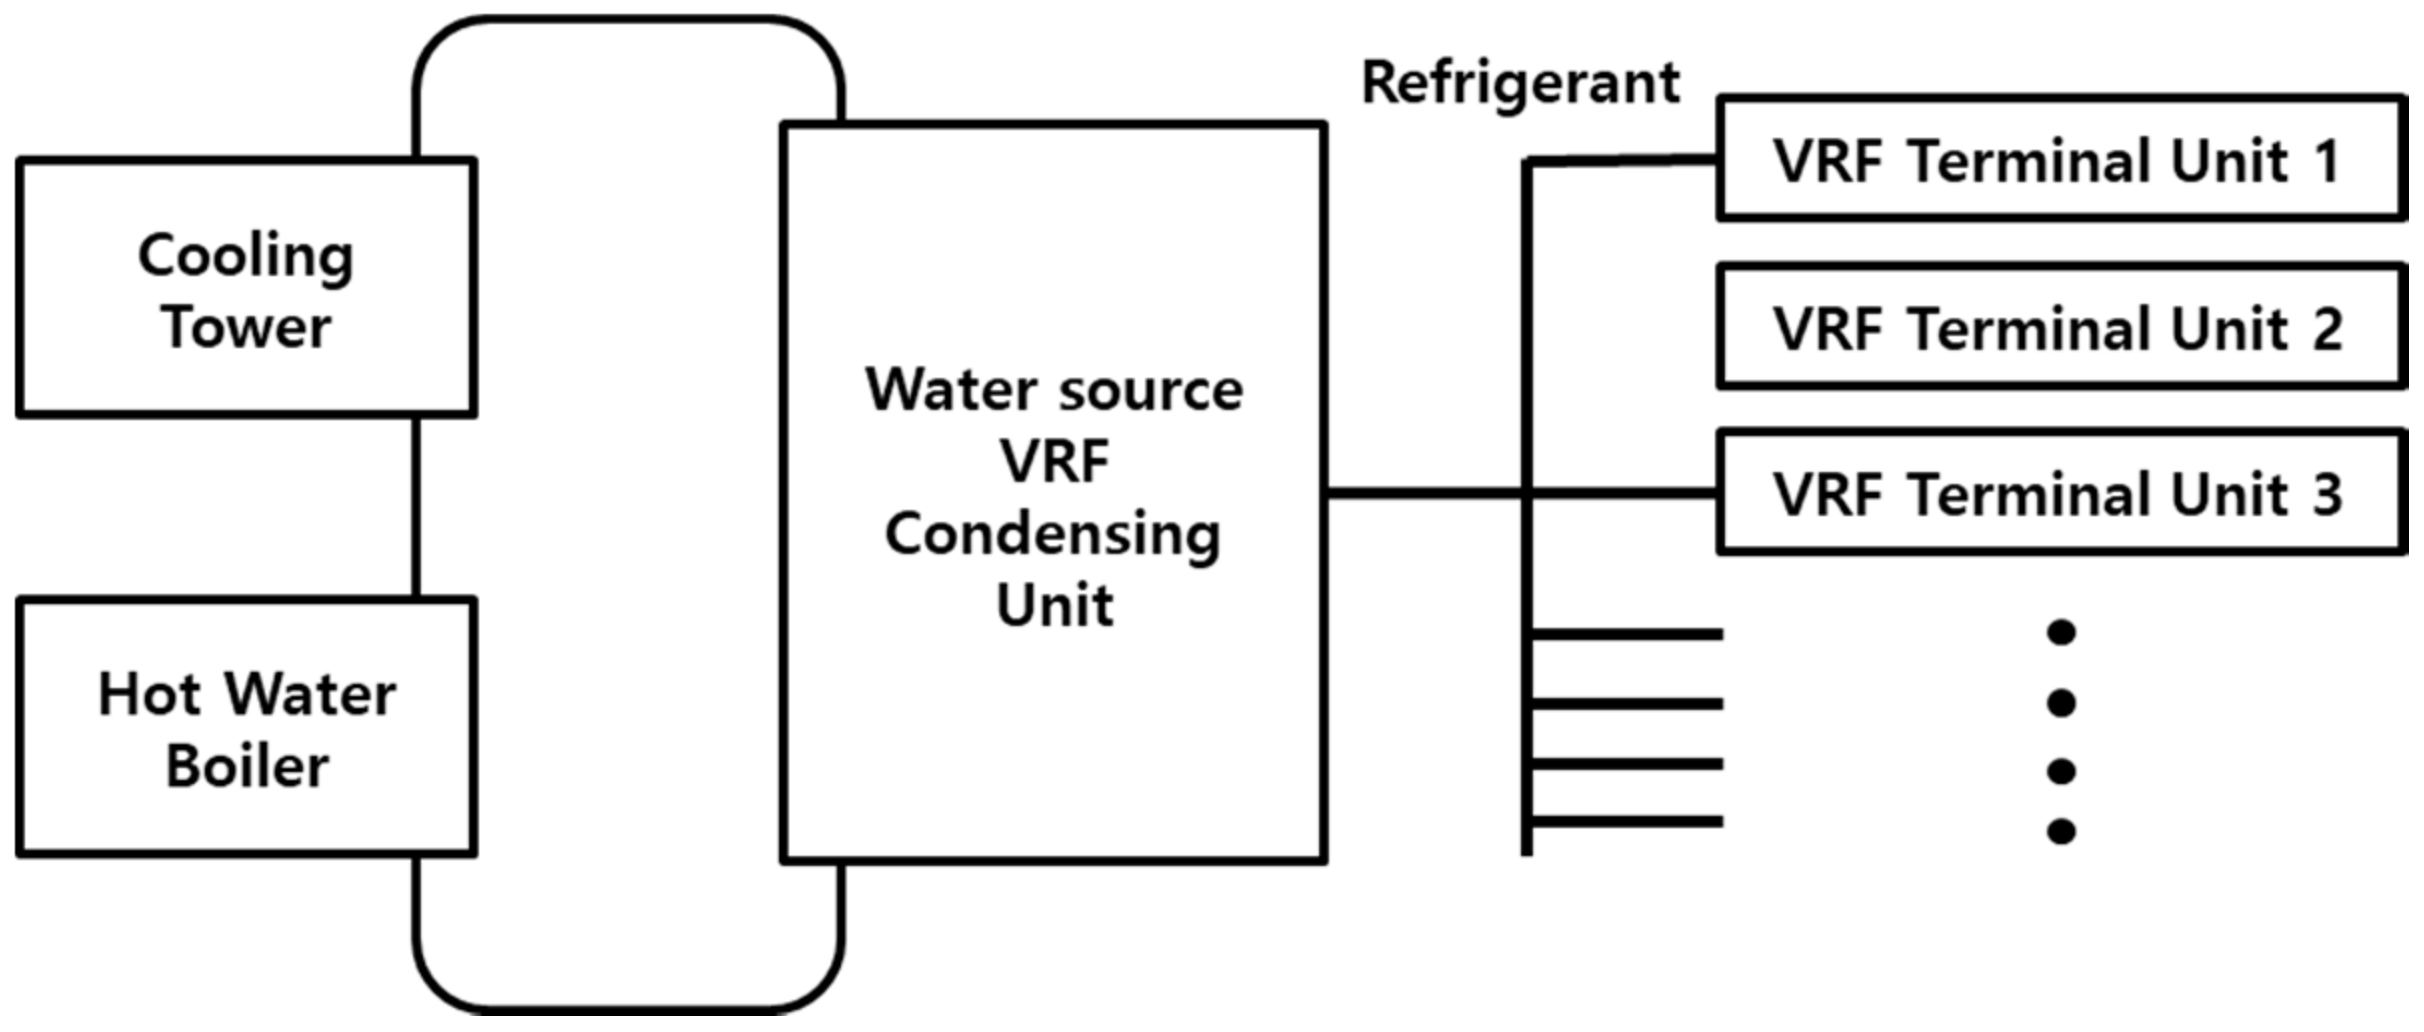 Variable source. VRF Water. VRF Water cooled. VRF Joint. 1982 Года, variable Refrigerant Volume.